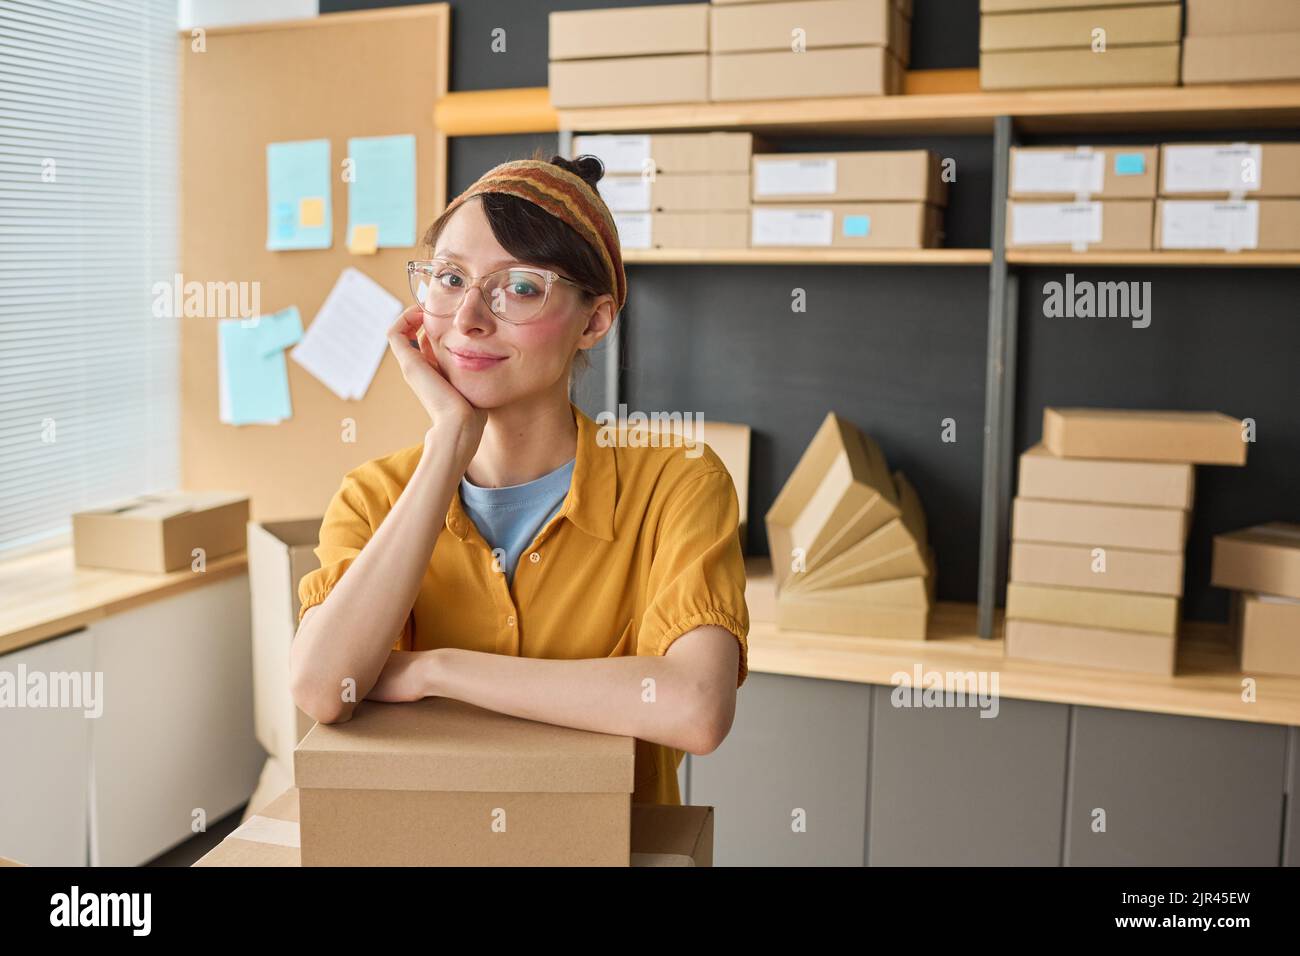 Portrait of female warehouse worker looking at camera while packing parcels in storage Stock Photo